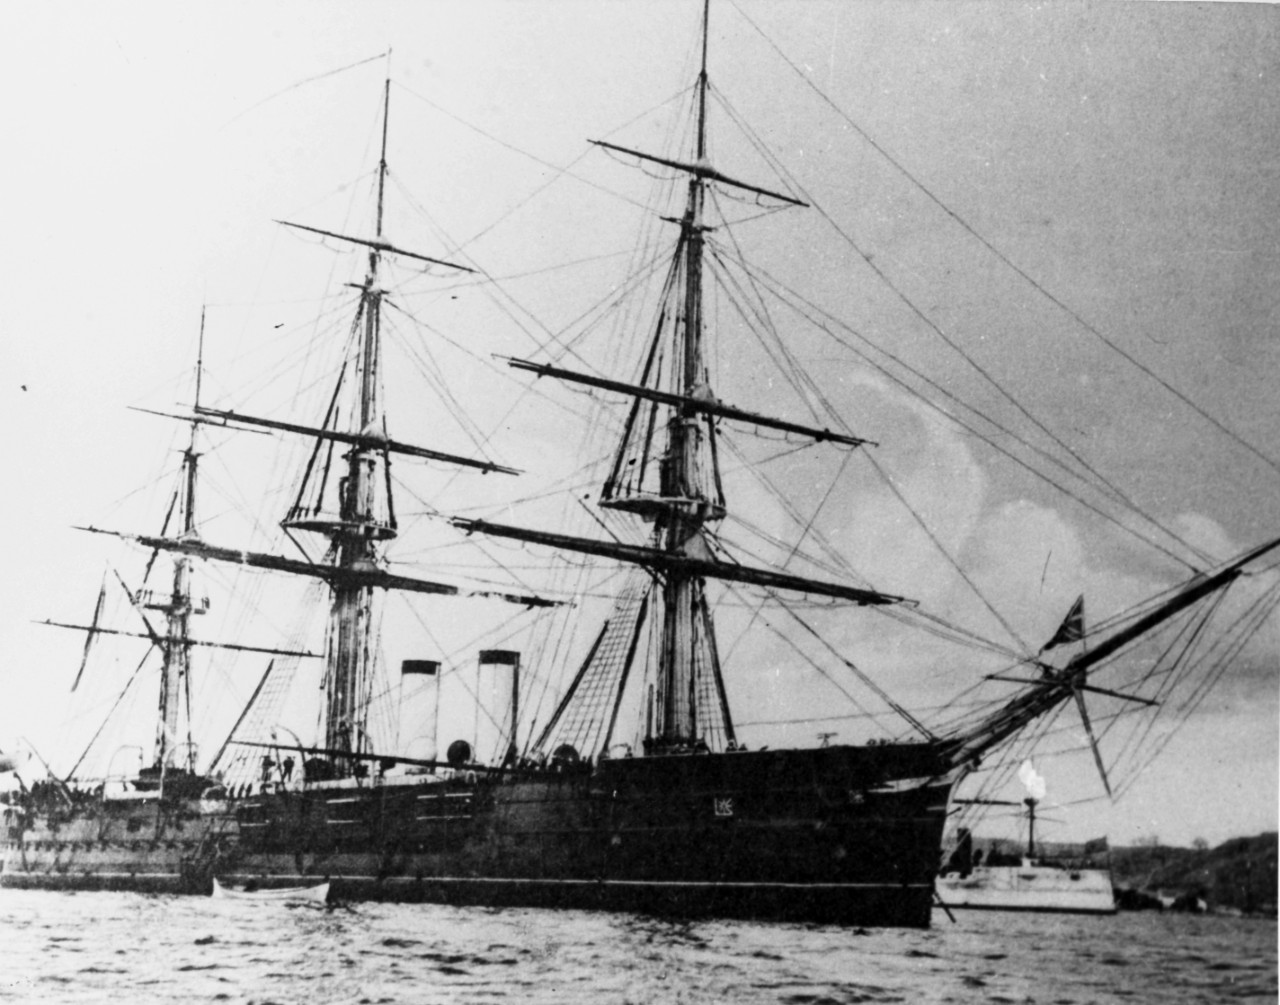 GENERAL ADMIRAL (Russian Armored cruiser, 1873)